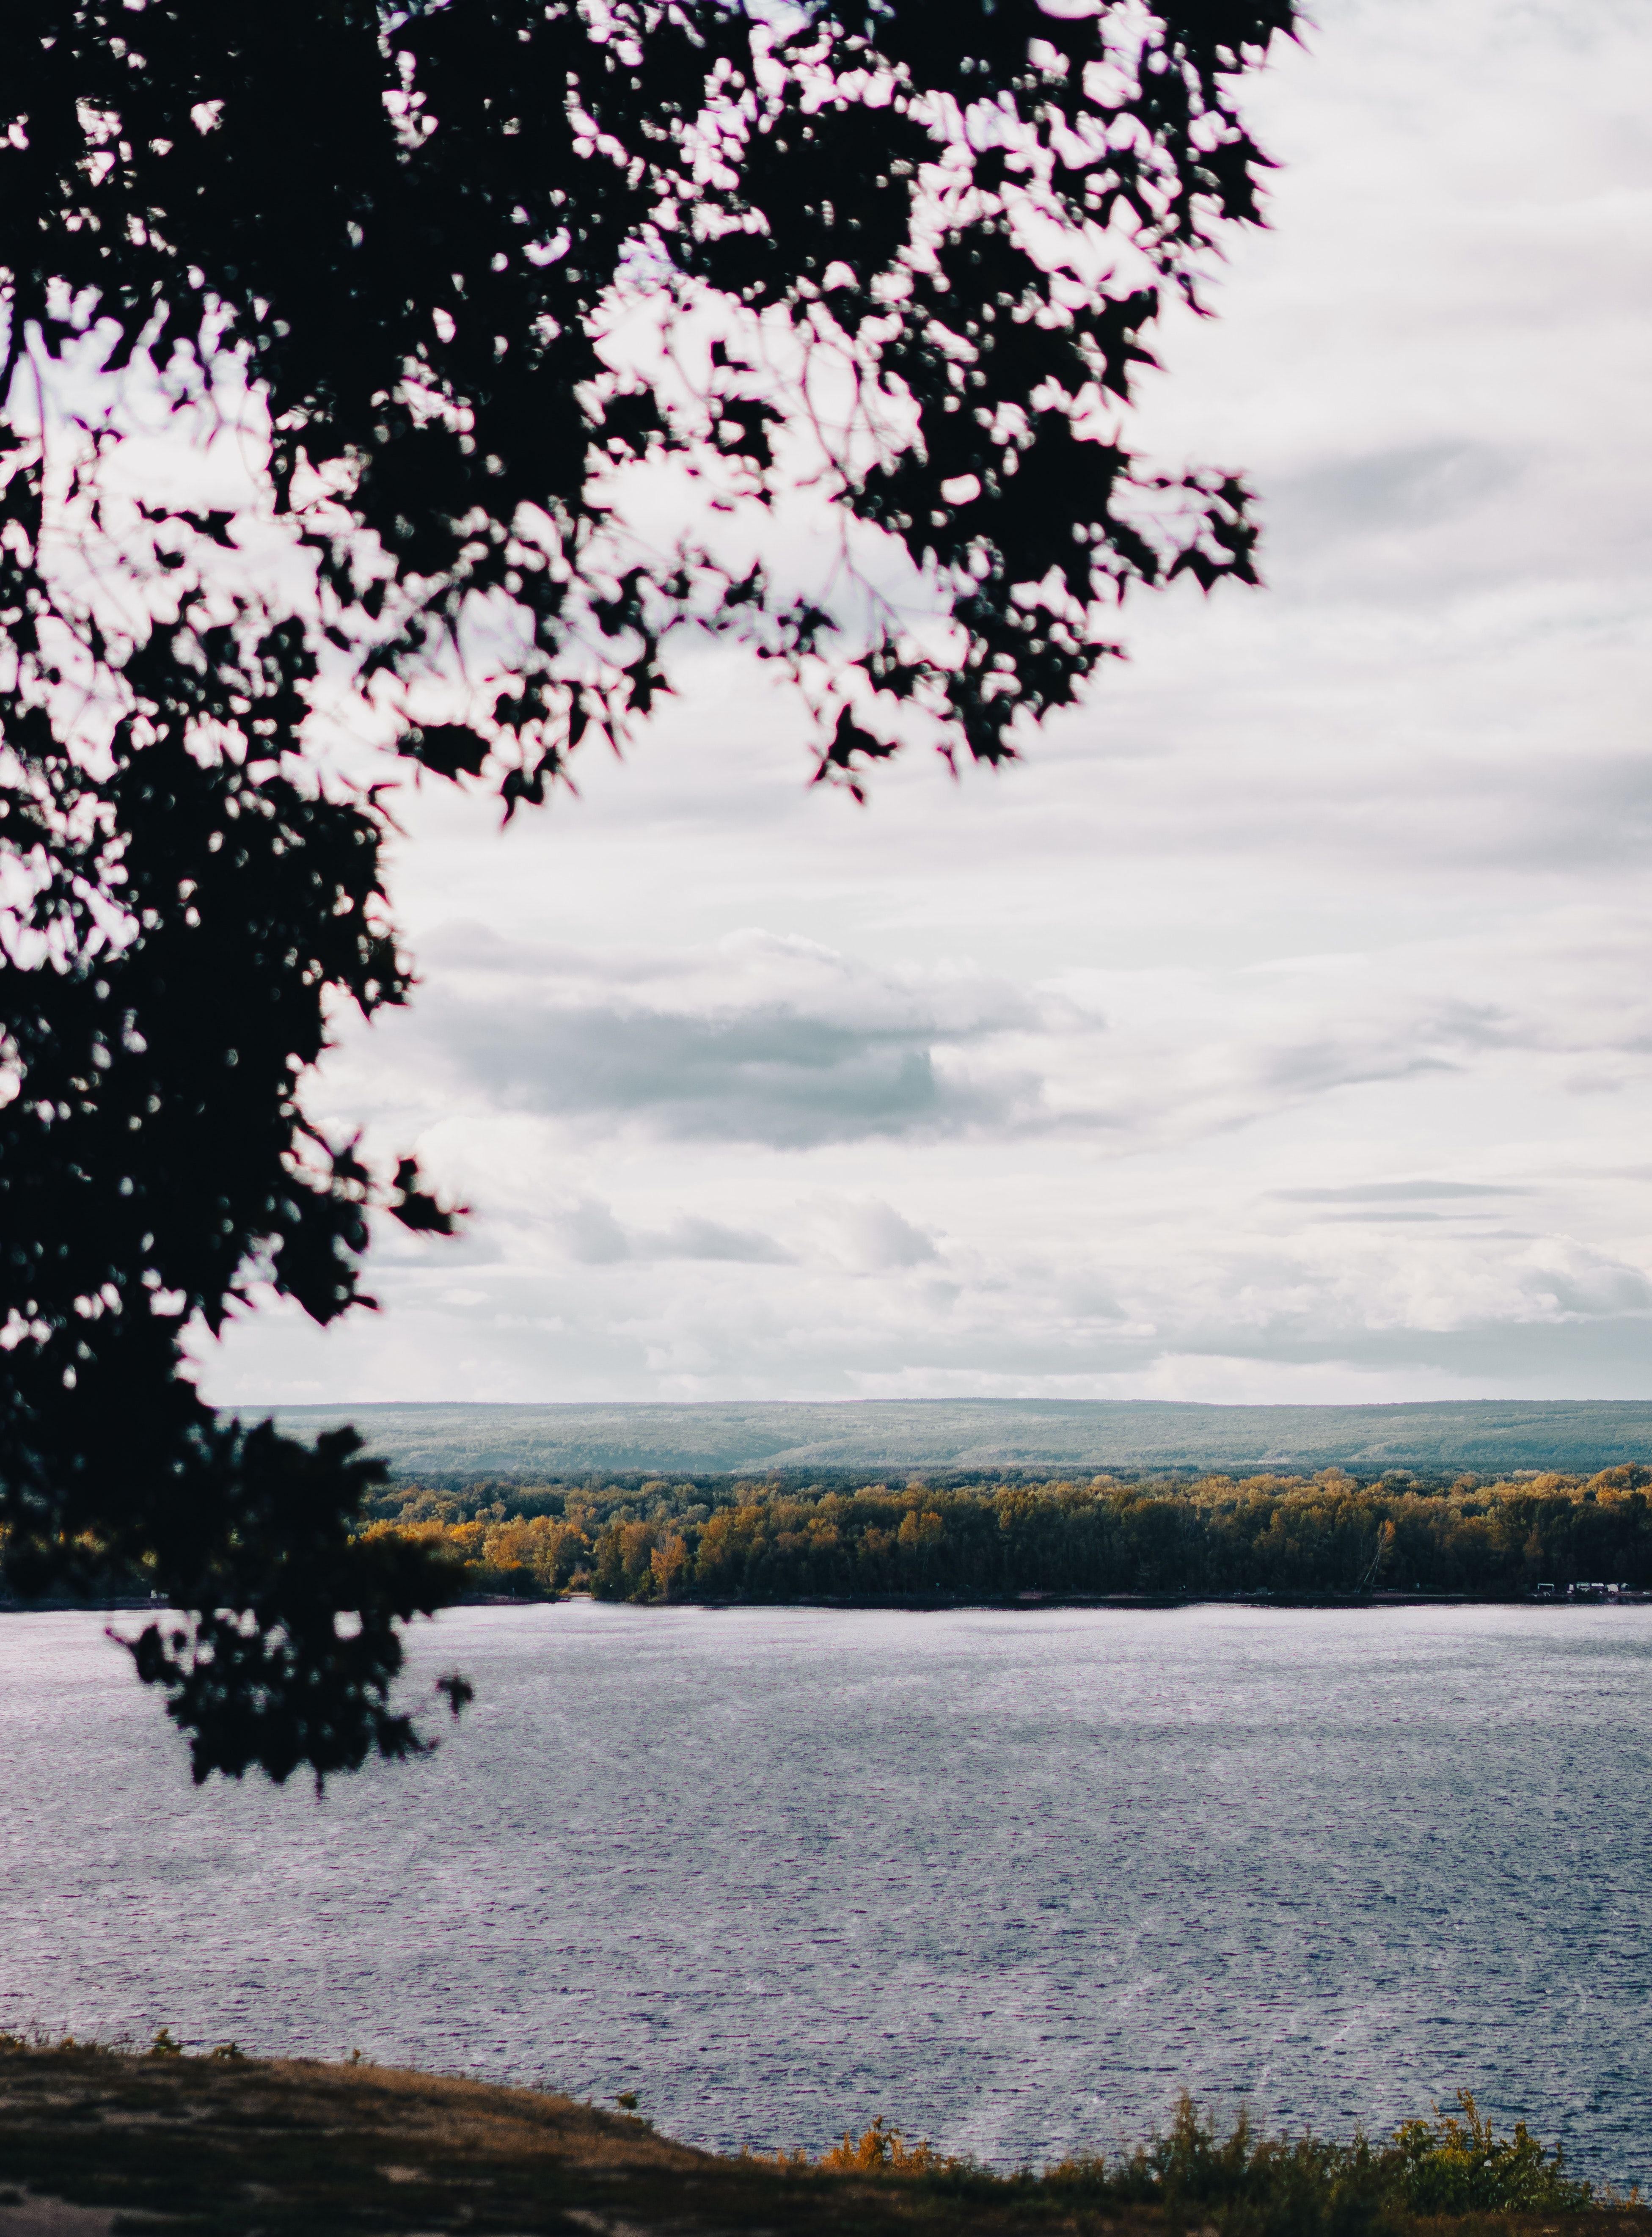 A tree branch frames a view of a lake and forest in the distance. - Lake